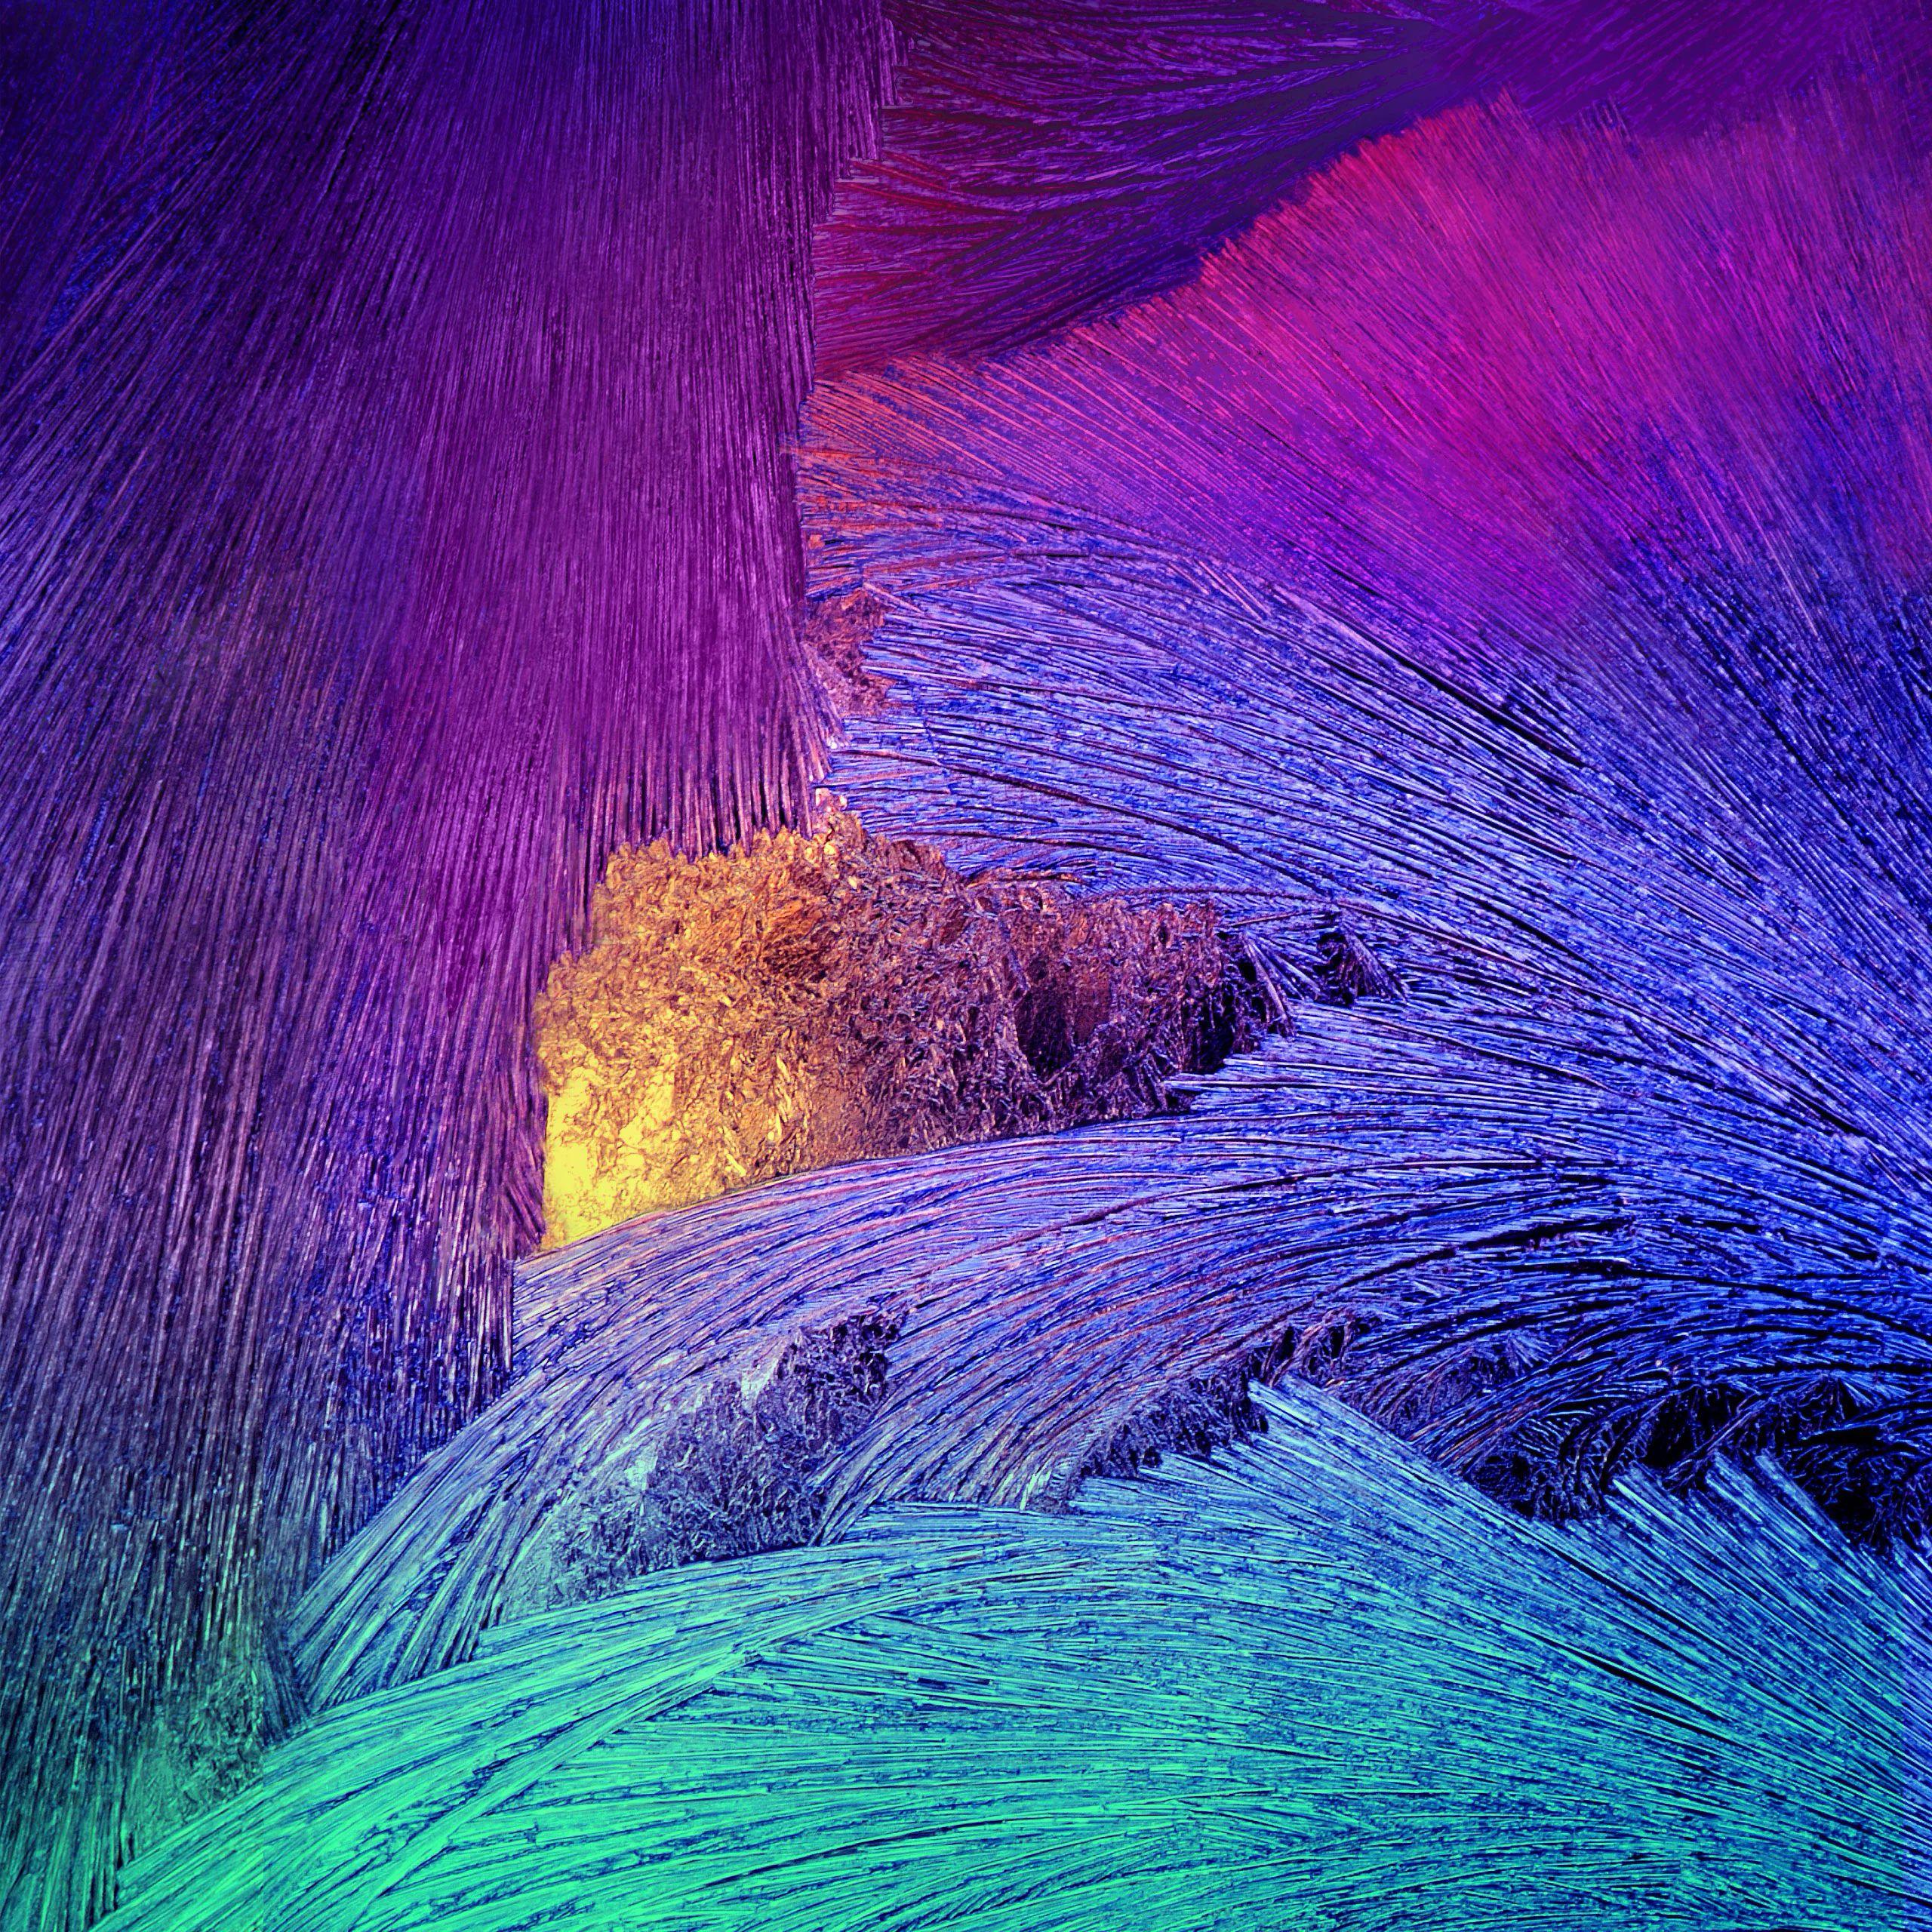 Galaxy Note 3 Wallpapers - Top Free Galaxy Note 3 ...